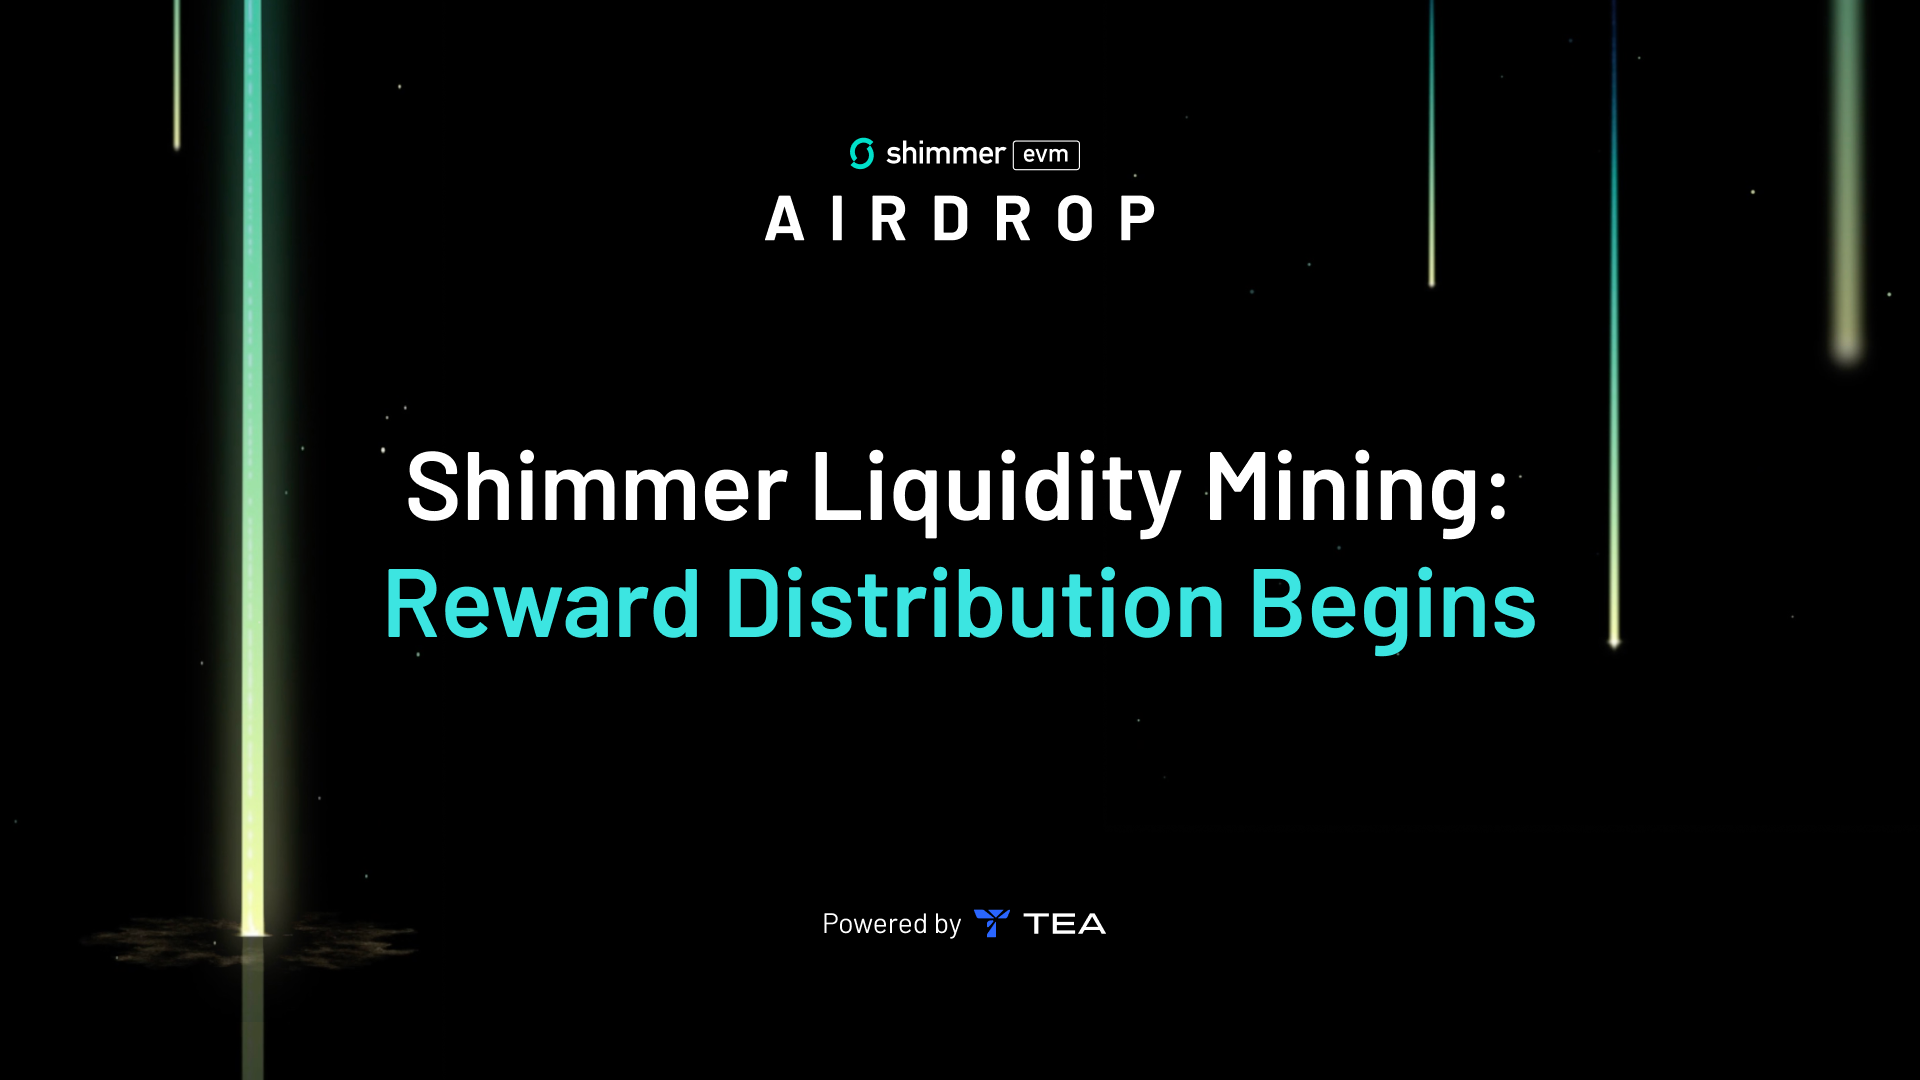 The Shimmer Liquidity Mining Campaign Airdrop Begins